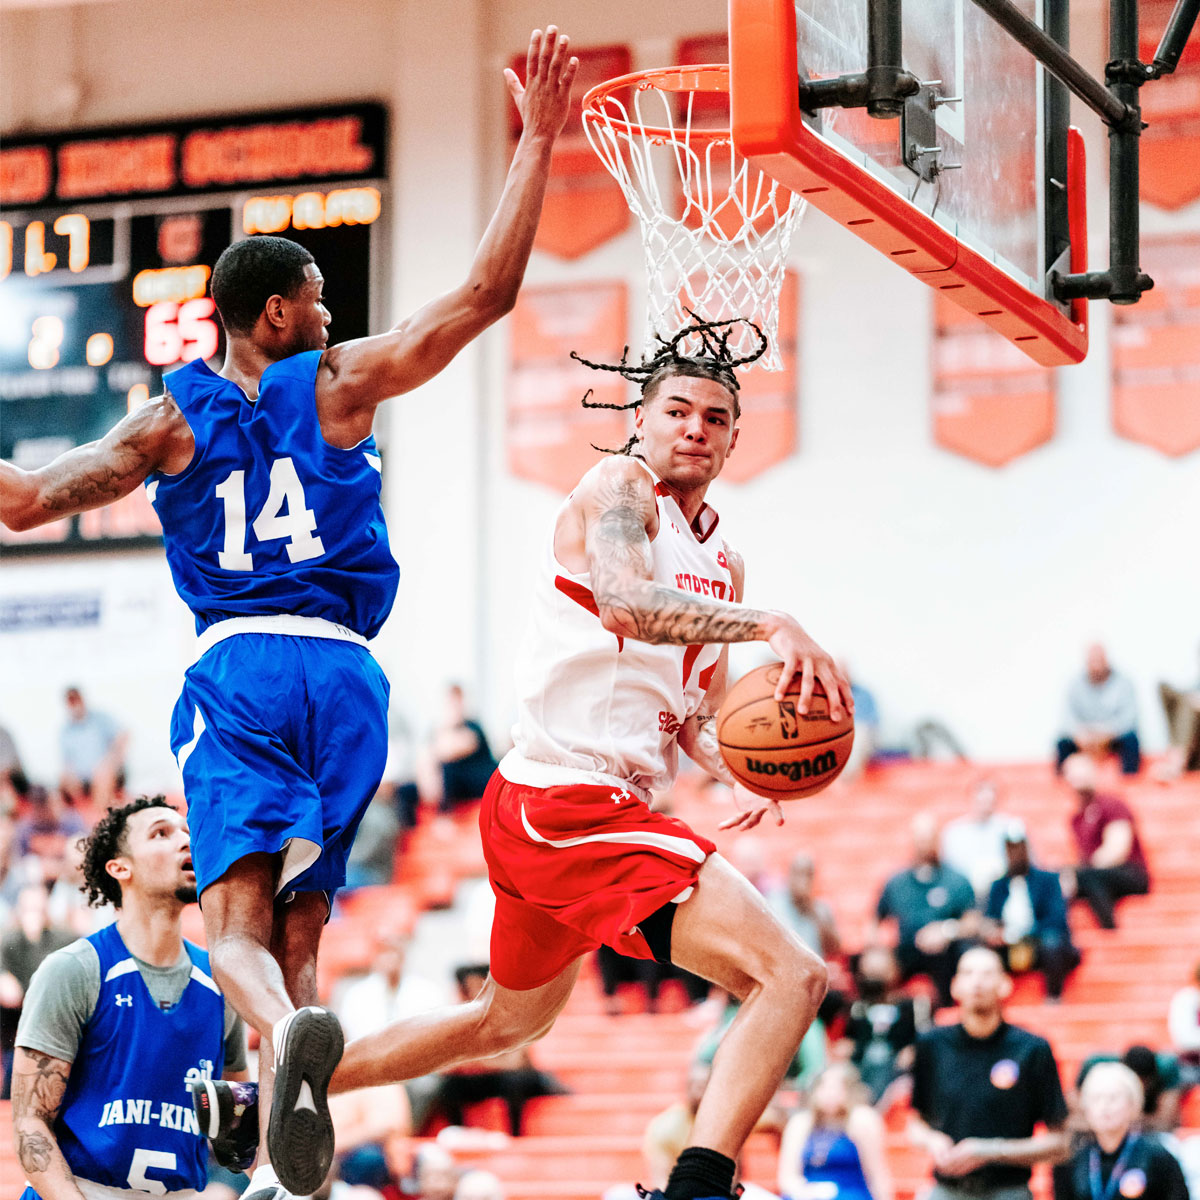 A basketball player taking a contested layup during the 2023 Portsmouth Invitational Tournament.